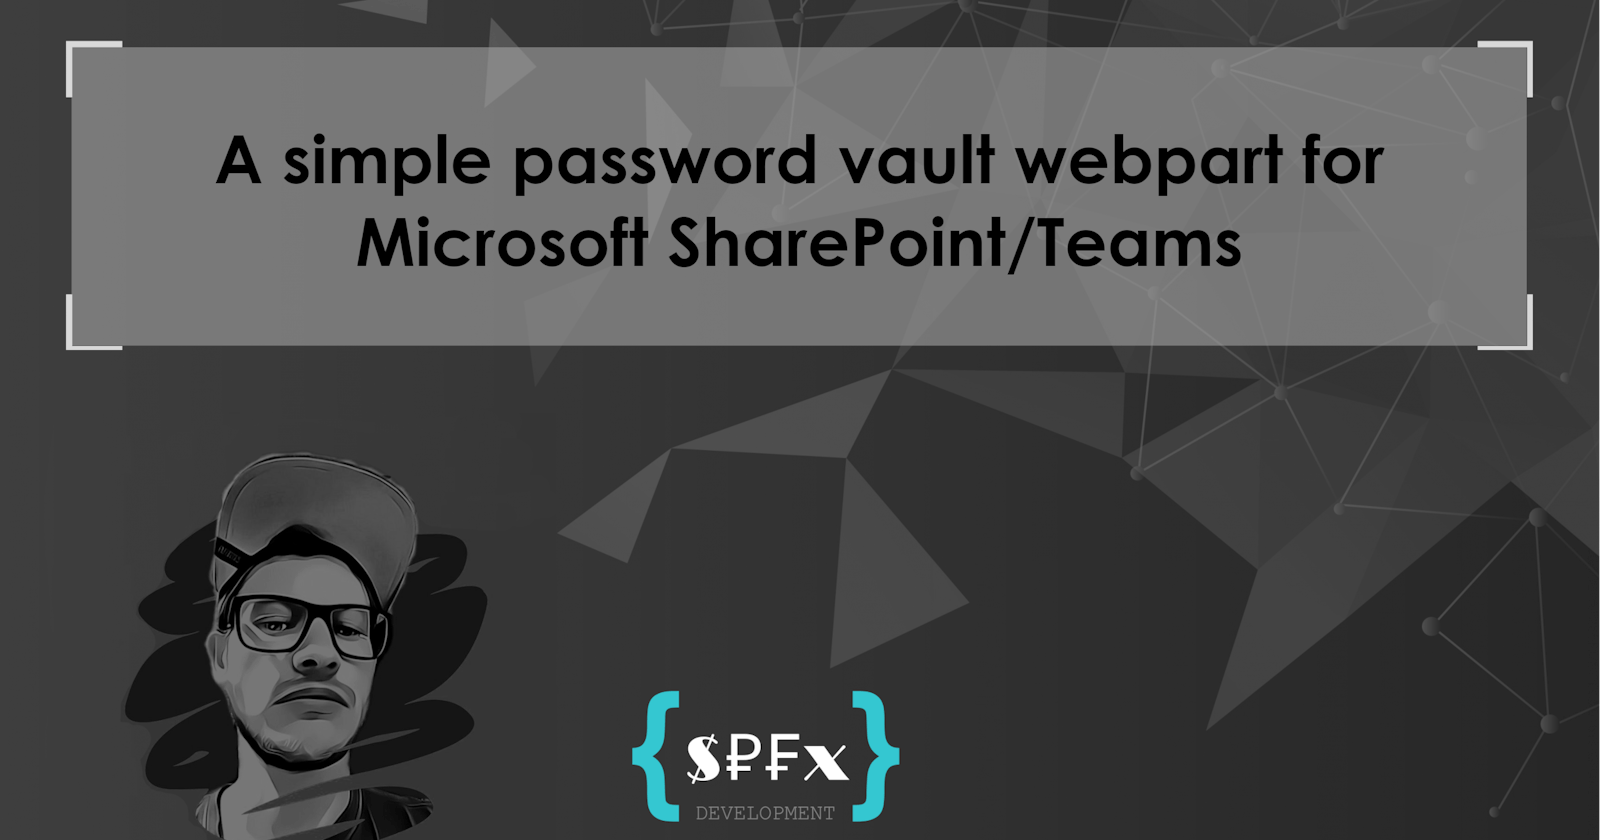 A simple password vault webpart for Microsoft SharePoint/Teams